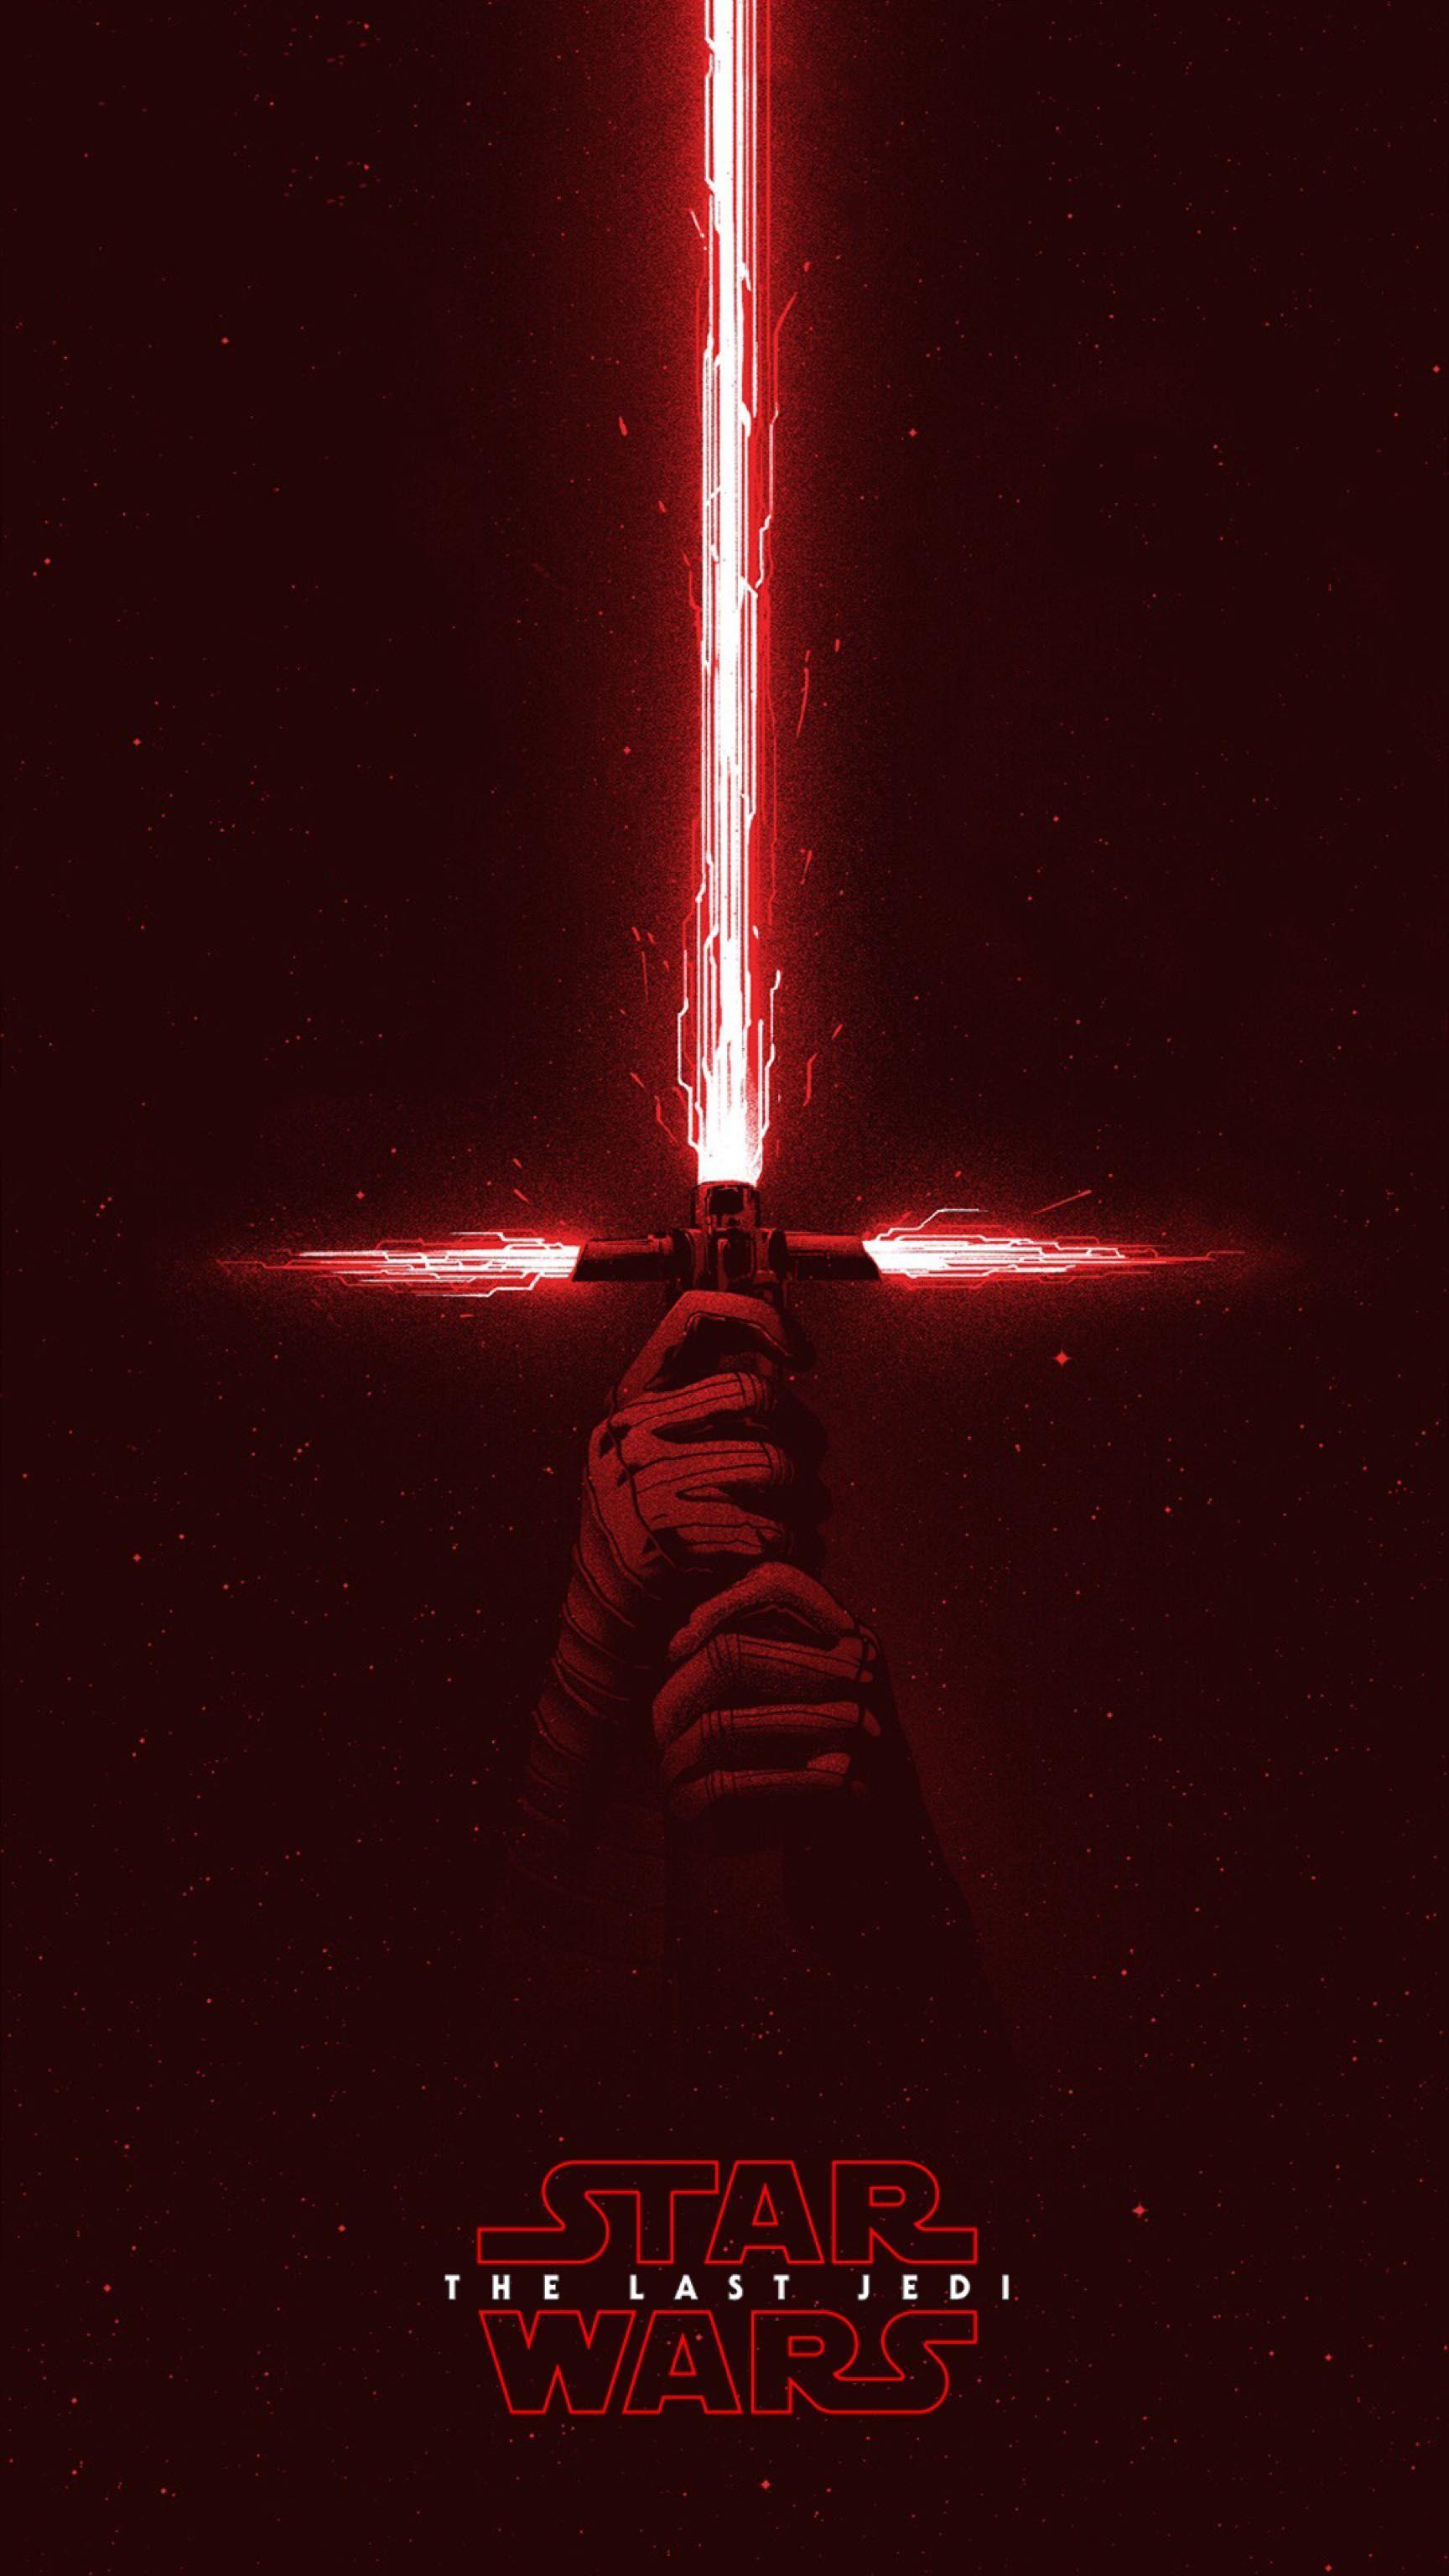 The Last Jedi Kylo Ren.heaven help us if hes the last Jedi. Star wars wallpaper, Kylo ren wallpaper, Star wars characters